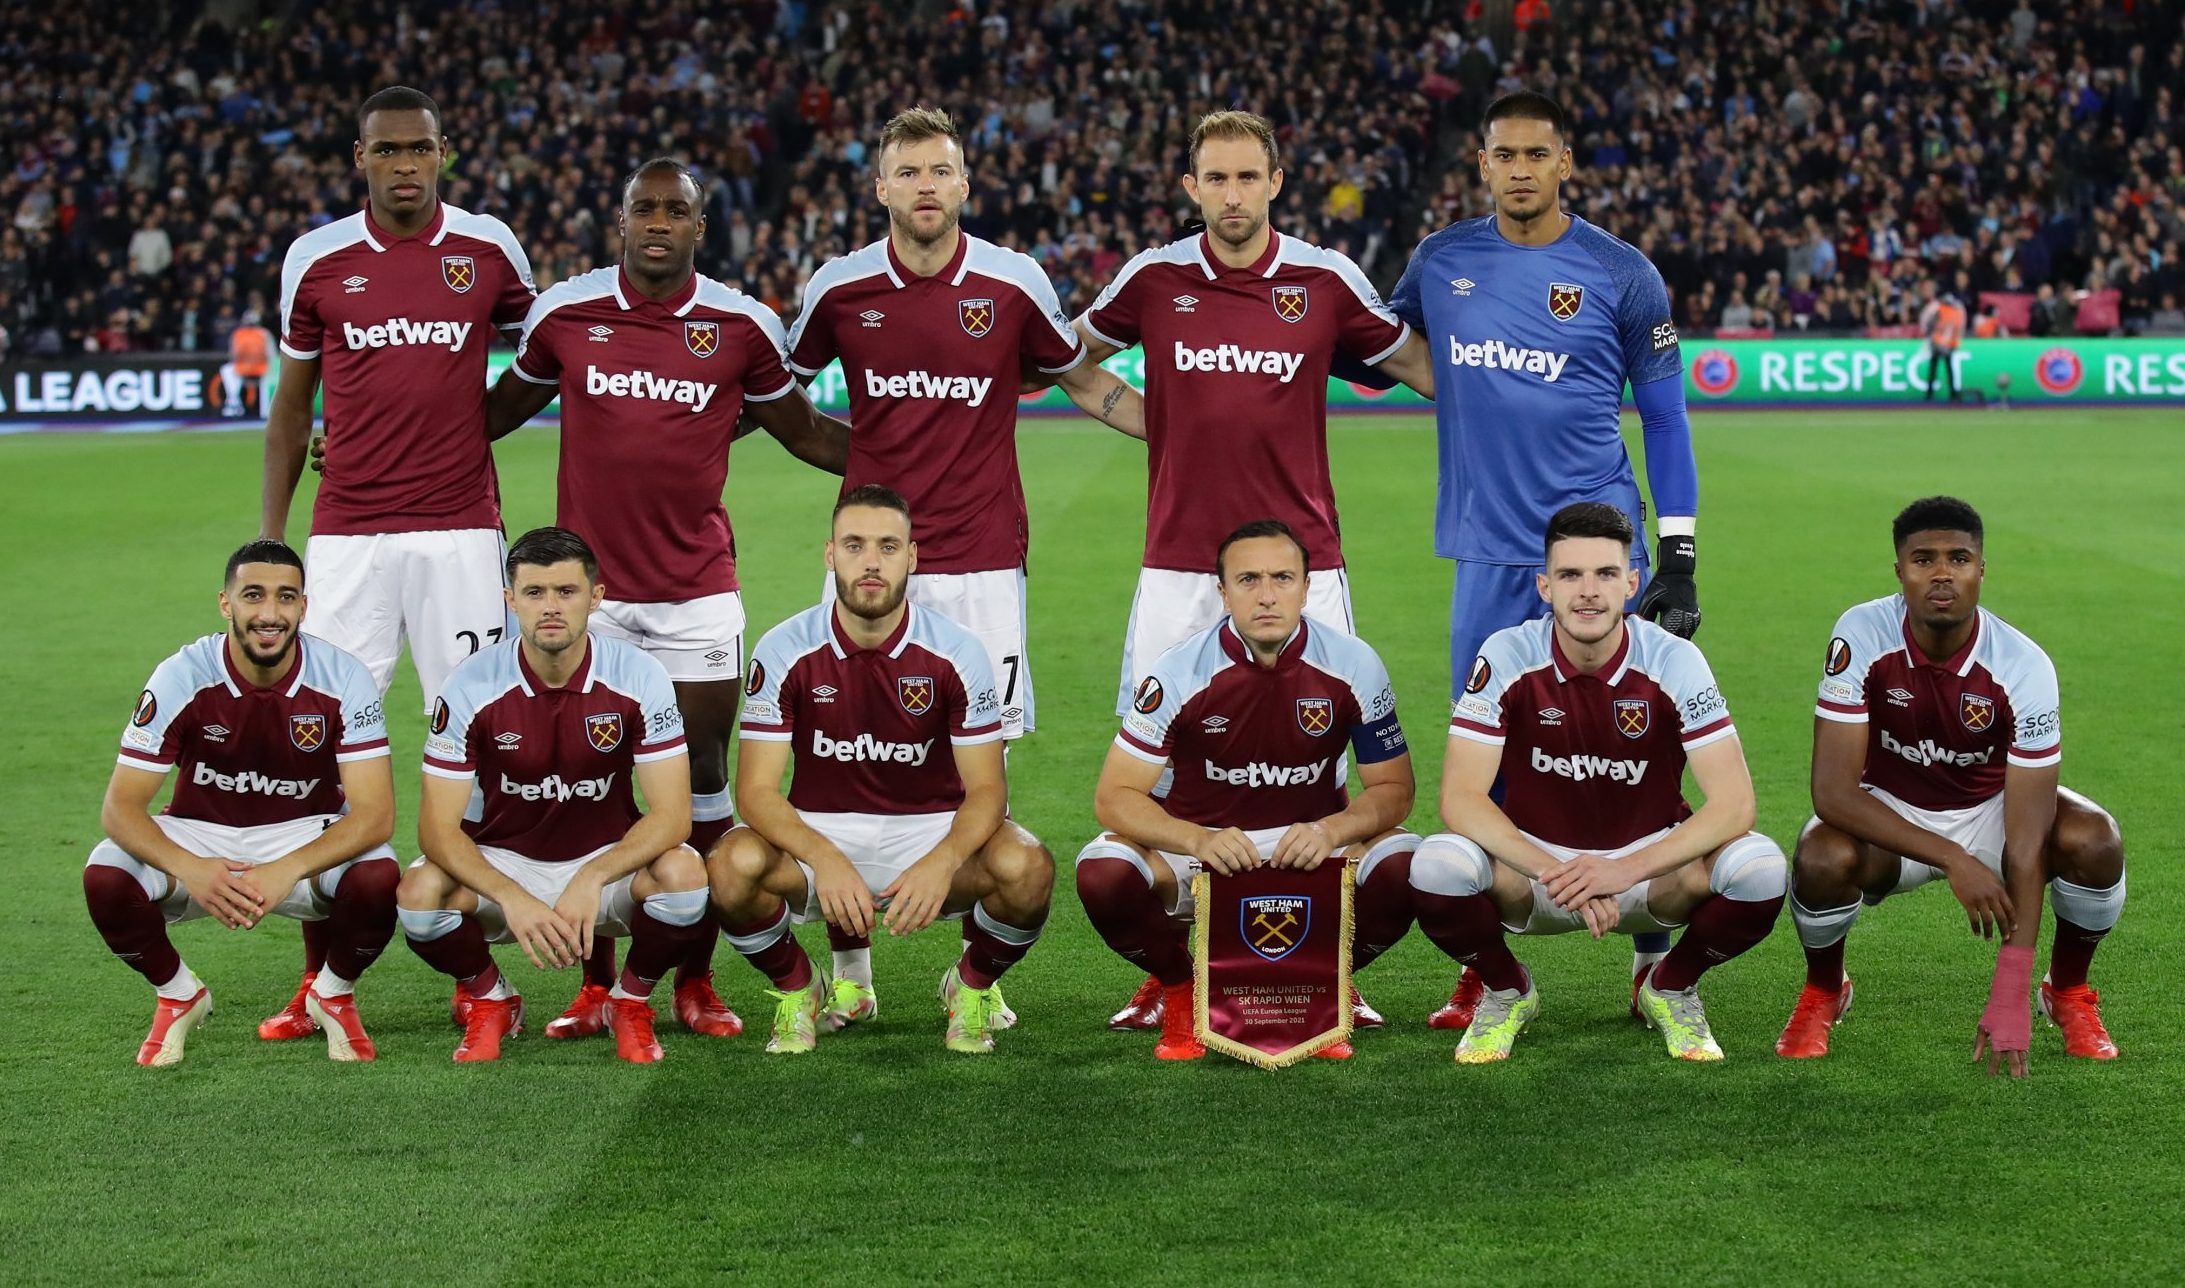 West Ham players lineup before Europa League clash with Rapid Wien at the London Stadium